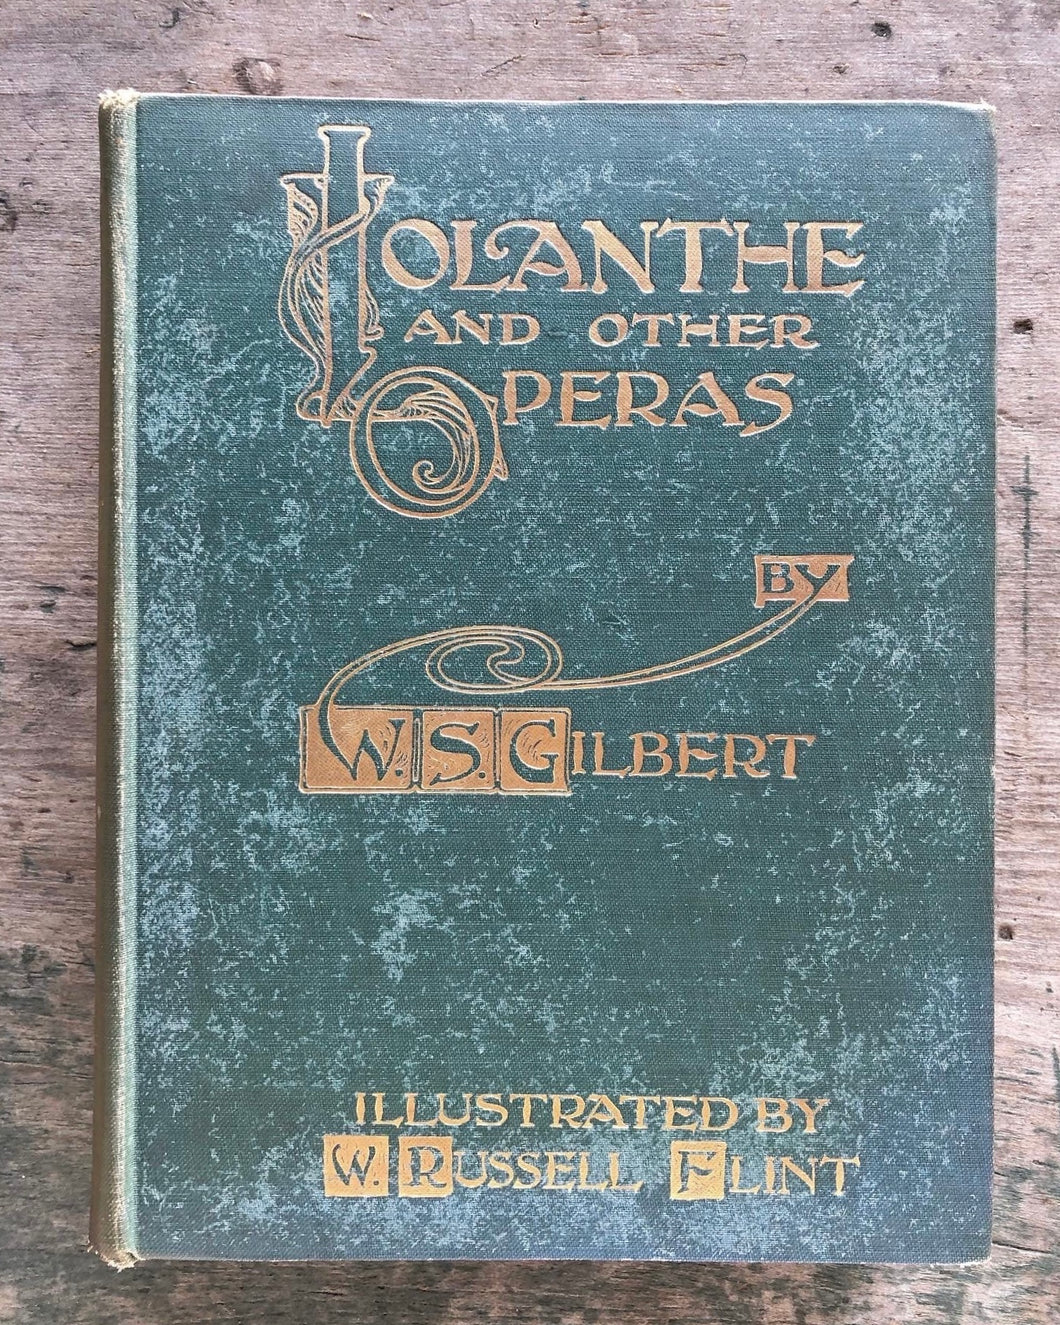 Iolanthe and Other Operas by W. S. Gilbert and illustrated by W. Russell Flint